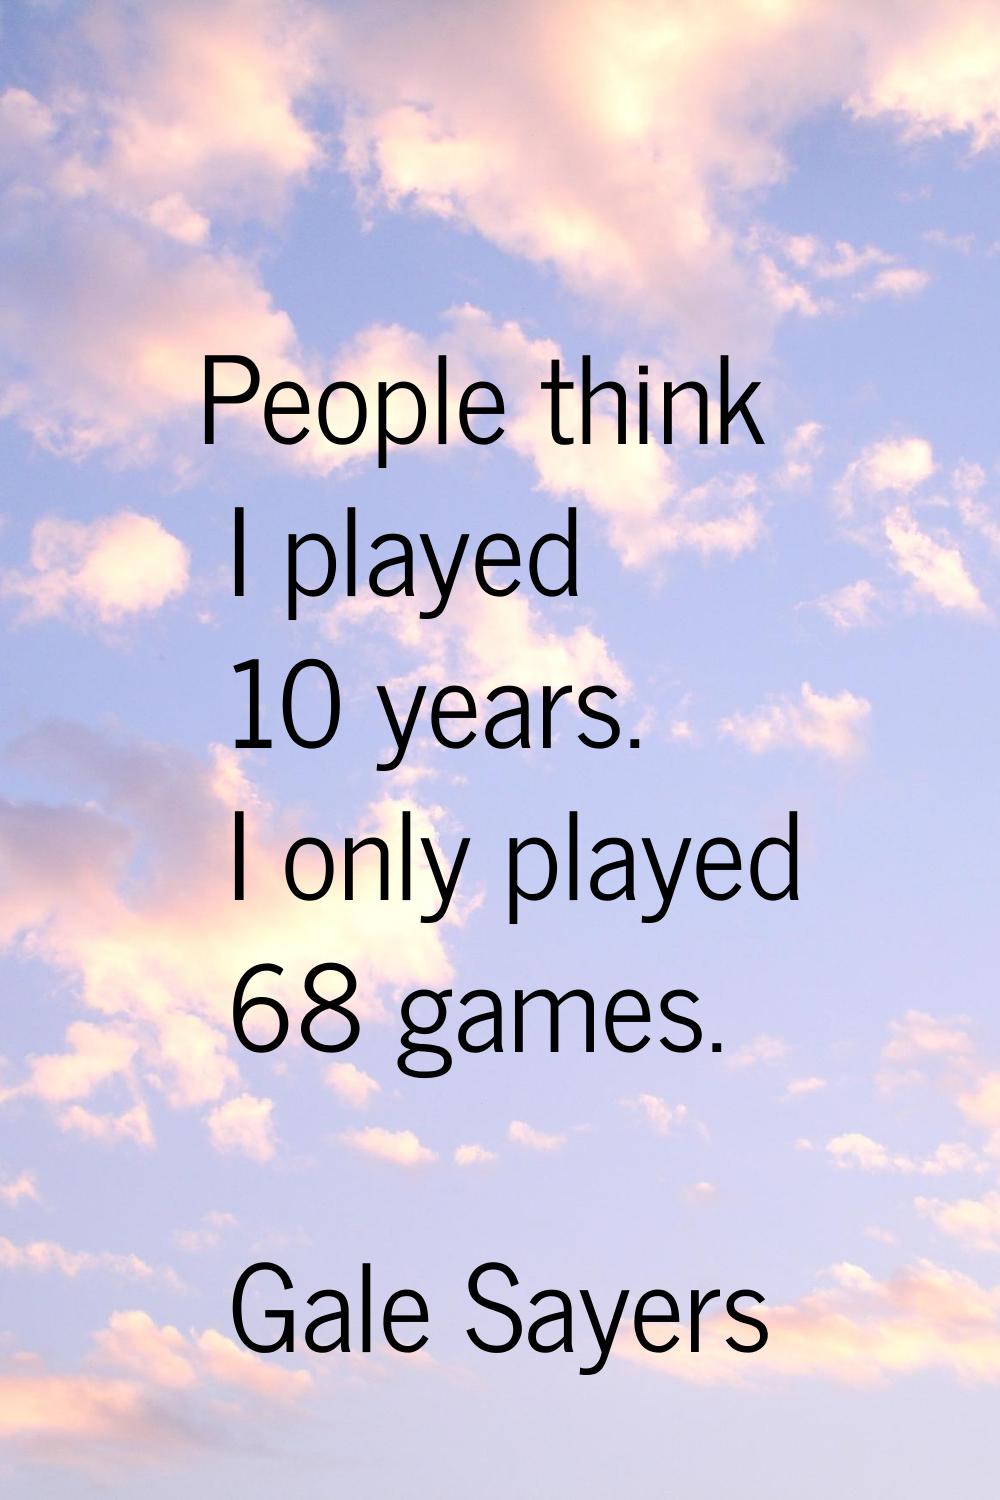 People think I played 10 years. I only played 68 games.